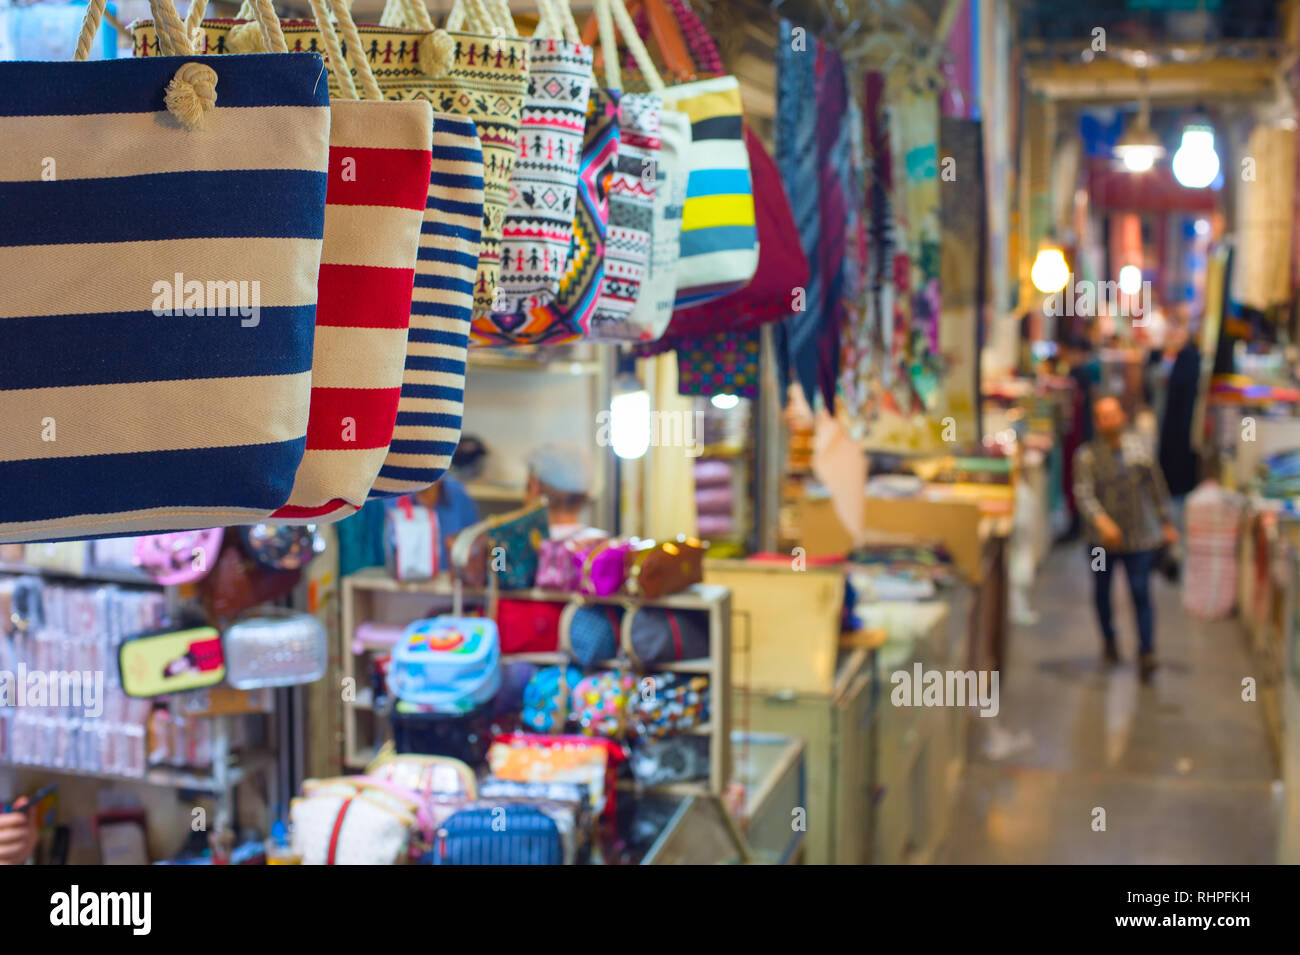 Grand Bazaar market in Tehran, rows of colorful textile crafts shops, bags in foreground, Iran Stock Photo